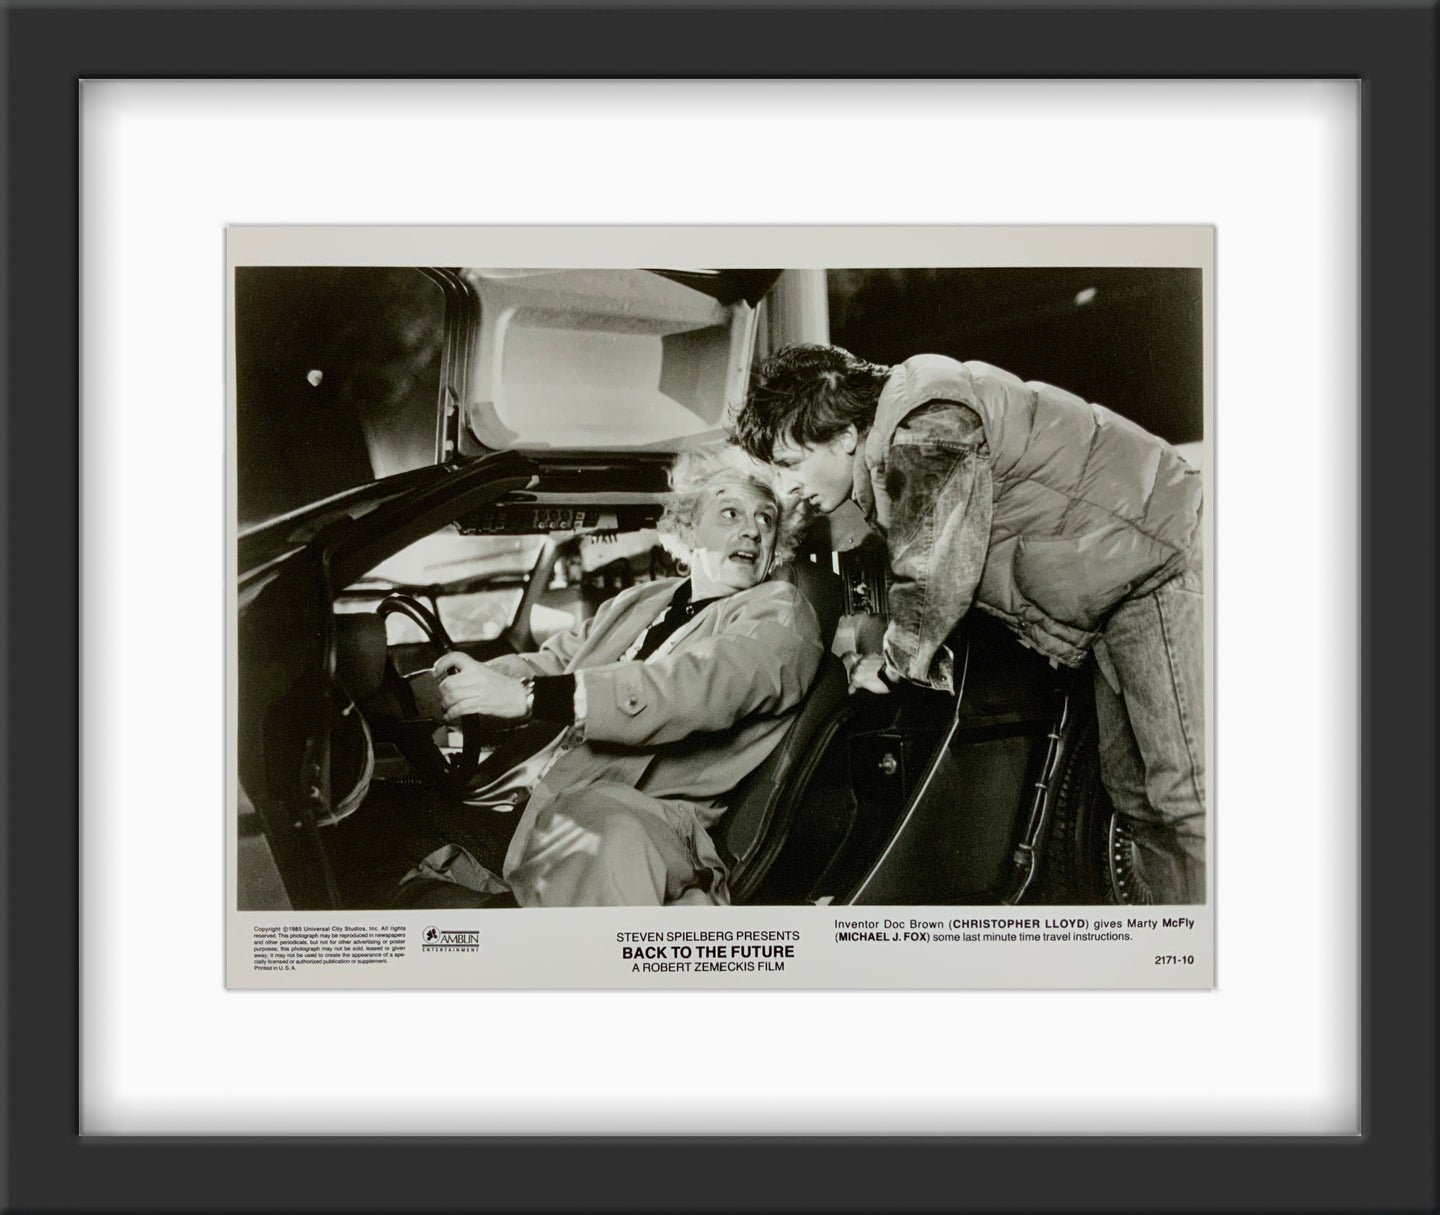 An original 8x10 movie still for the film Back To The Future